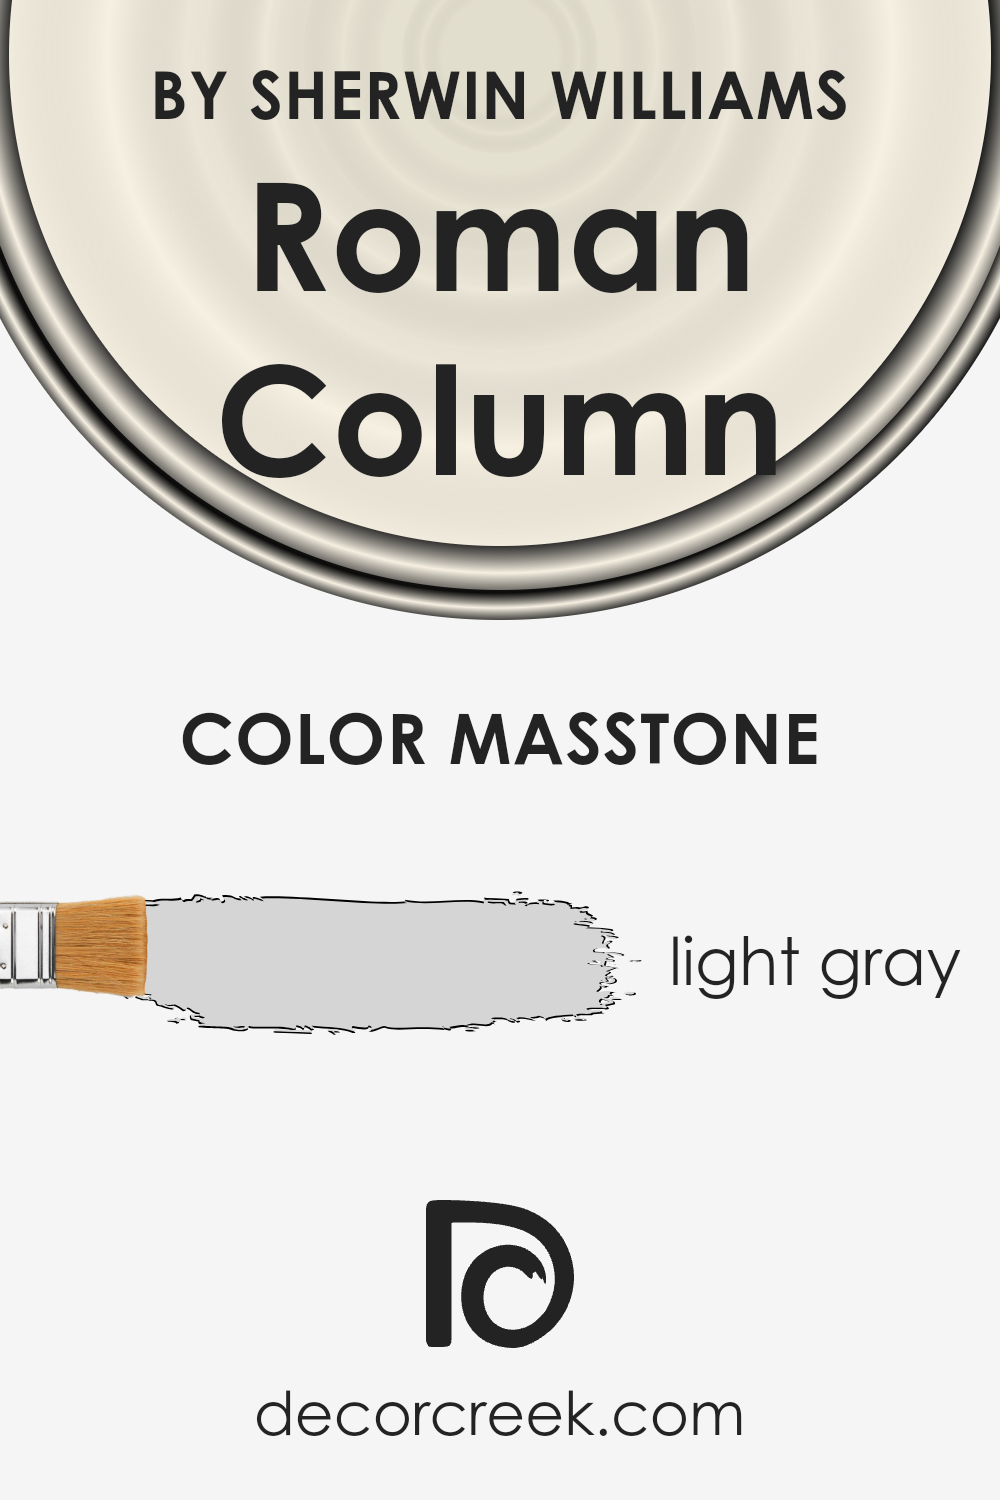 what_is_the_masstone_of_roman_column_sw_7562